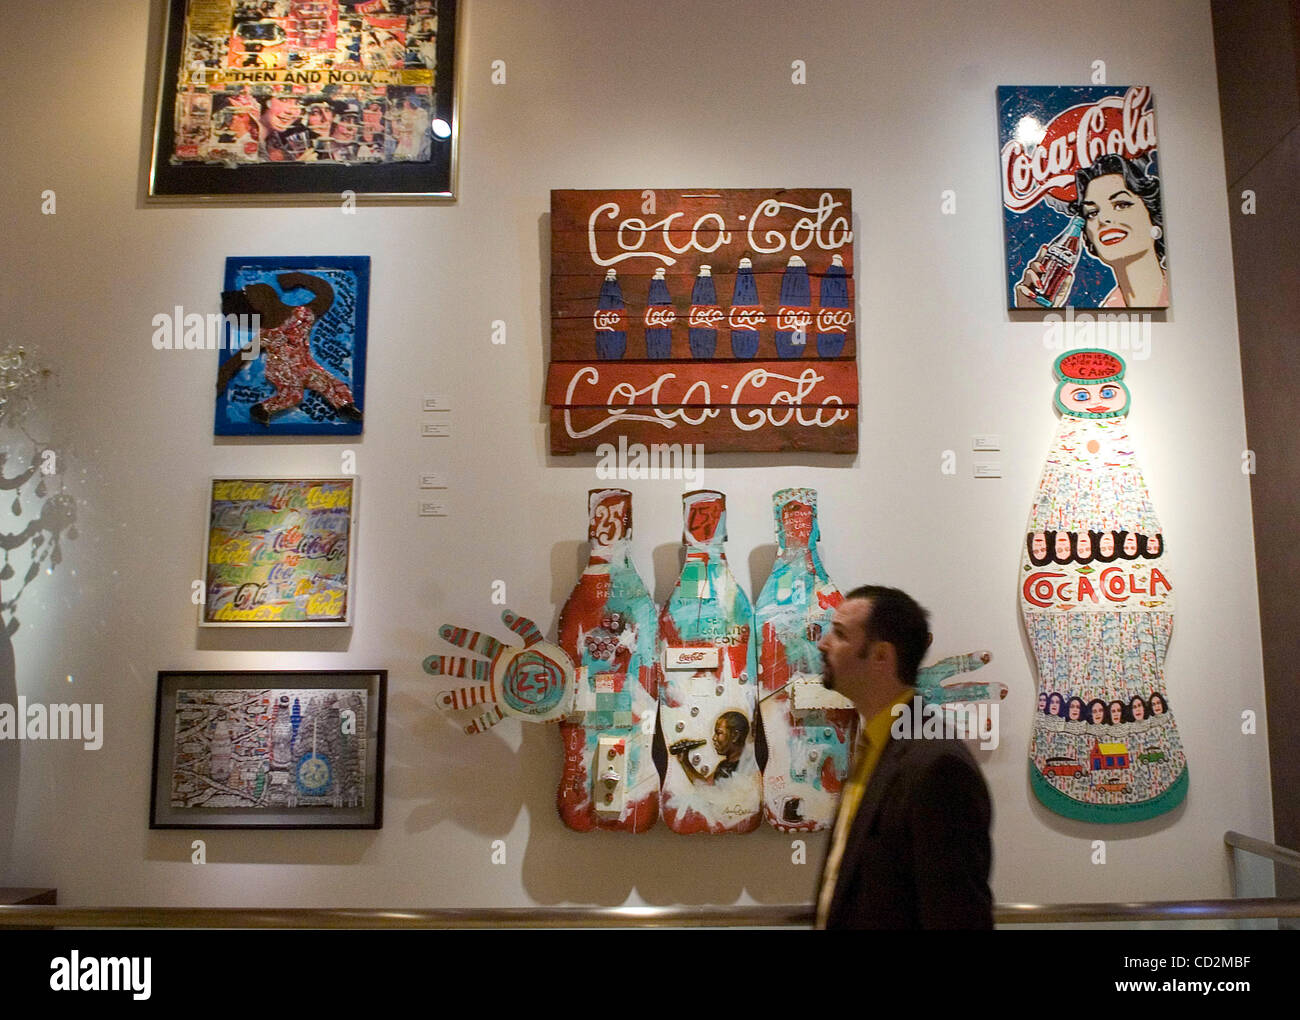 ATLANTA, GA - MAY 21: Product inspired artwork by Howard Finster inside the New World of Coca-Cola museum in Atlanta, Georgia on Monday, May 21, 2007.  (Photo by Erik S. Lesser/for The New York Times) Stock Photo